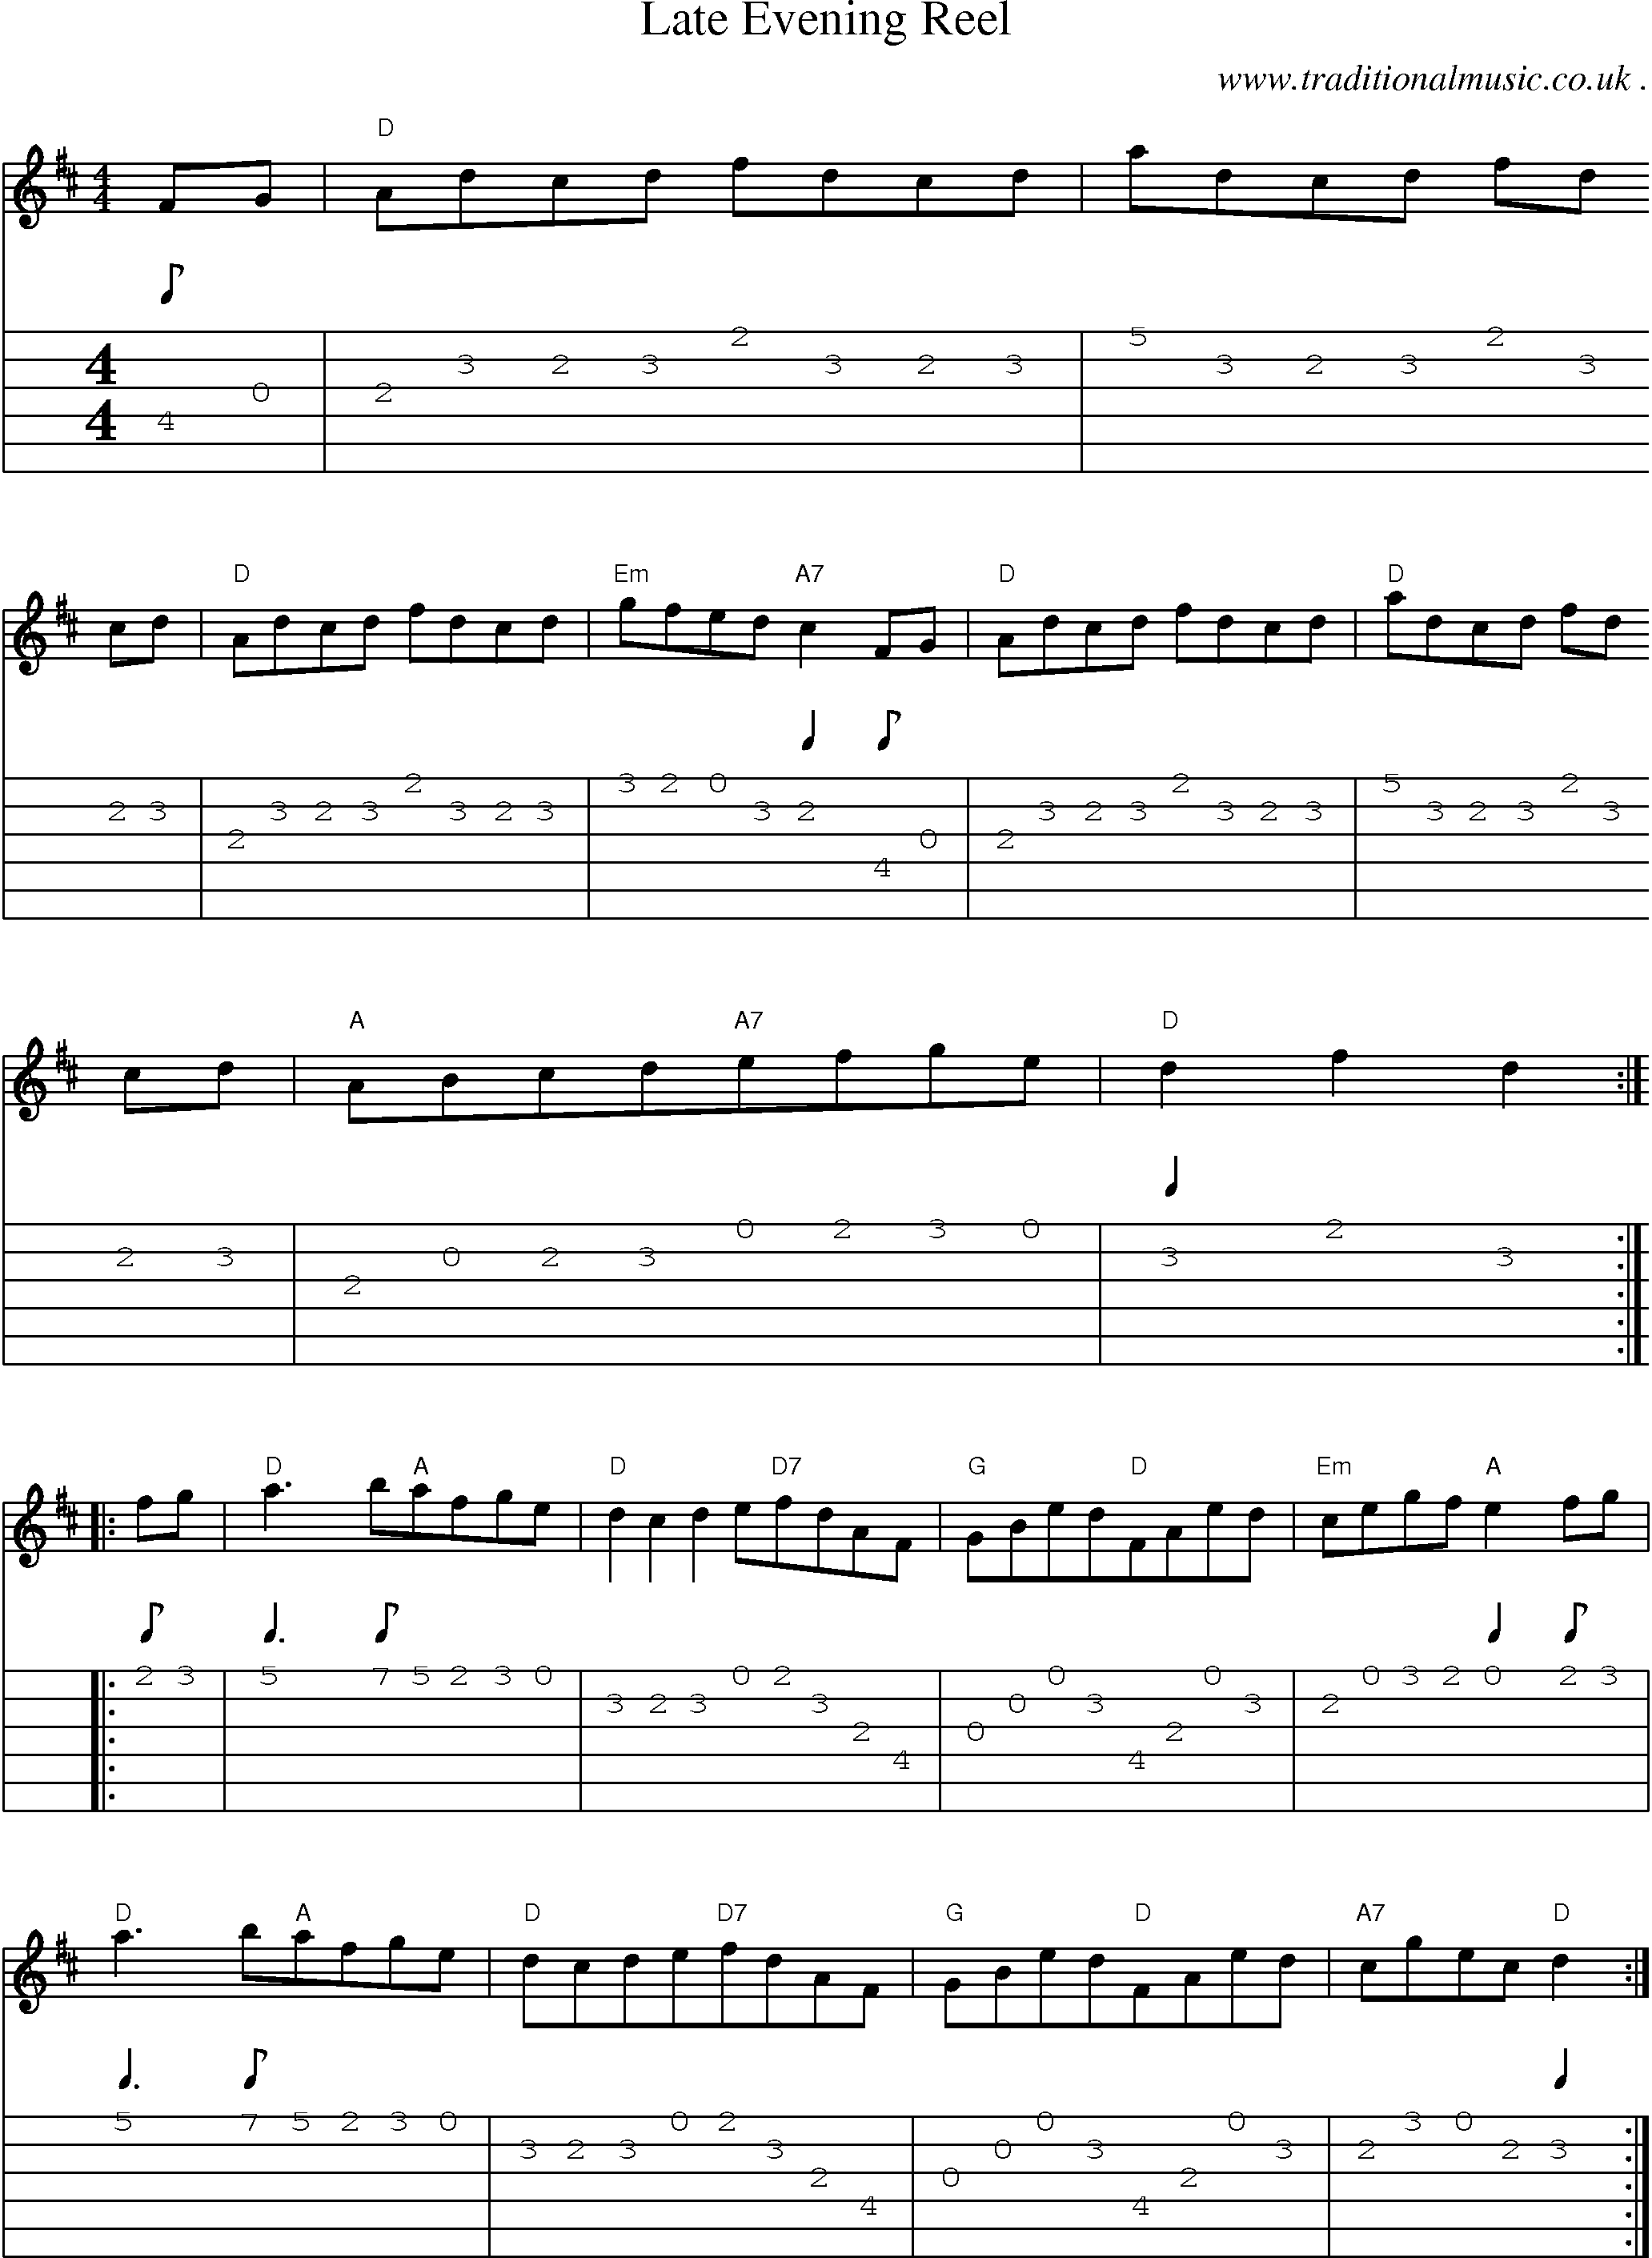 Sheet-Music and Guitar Tabs for Late Evening Reel